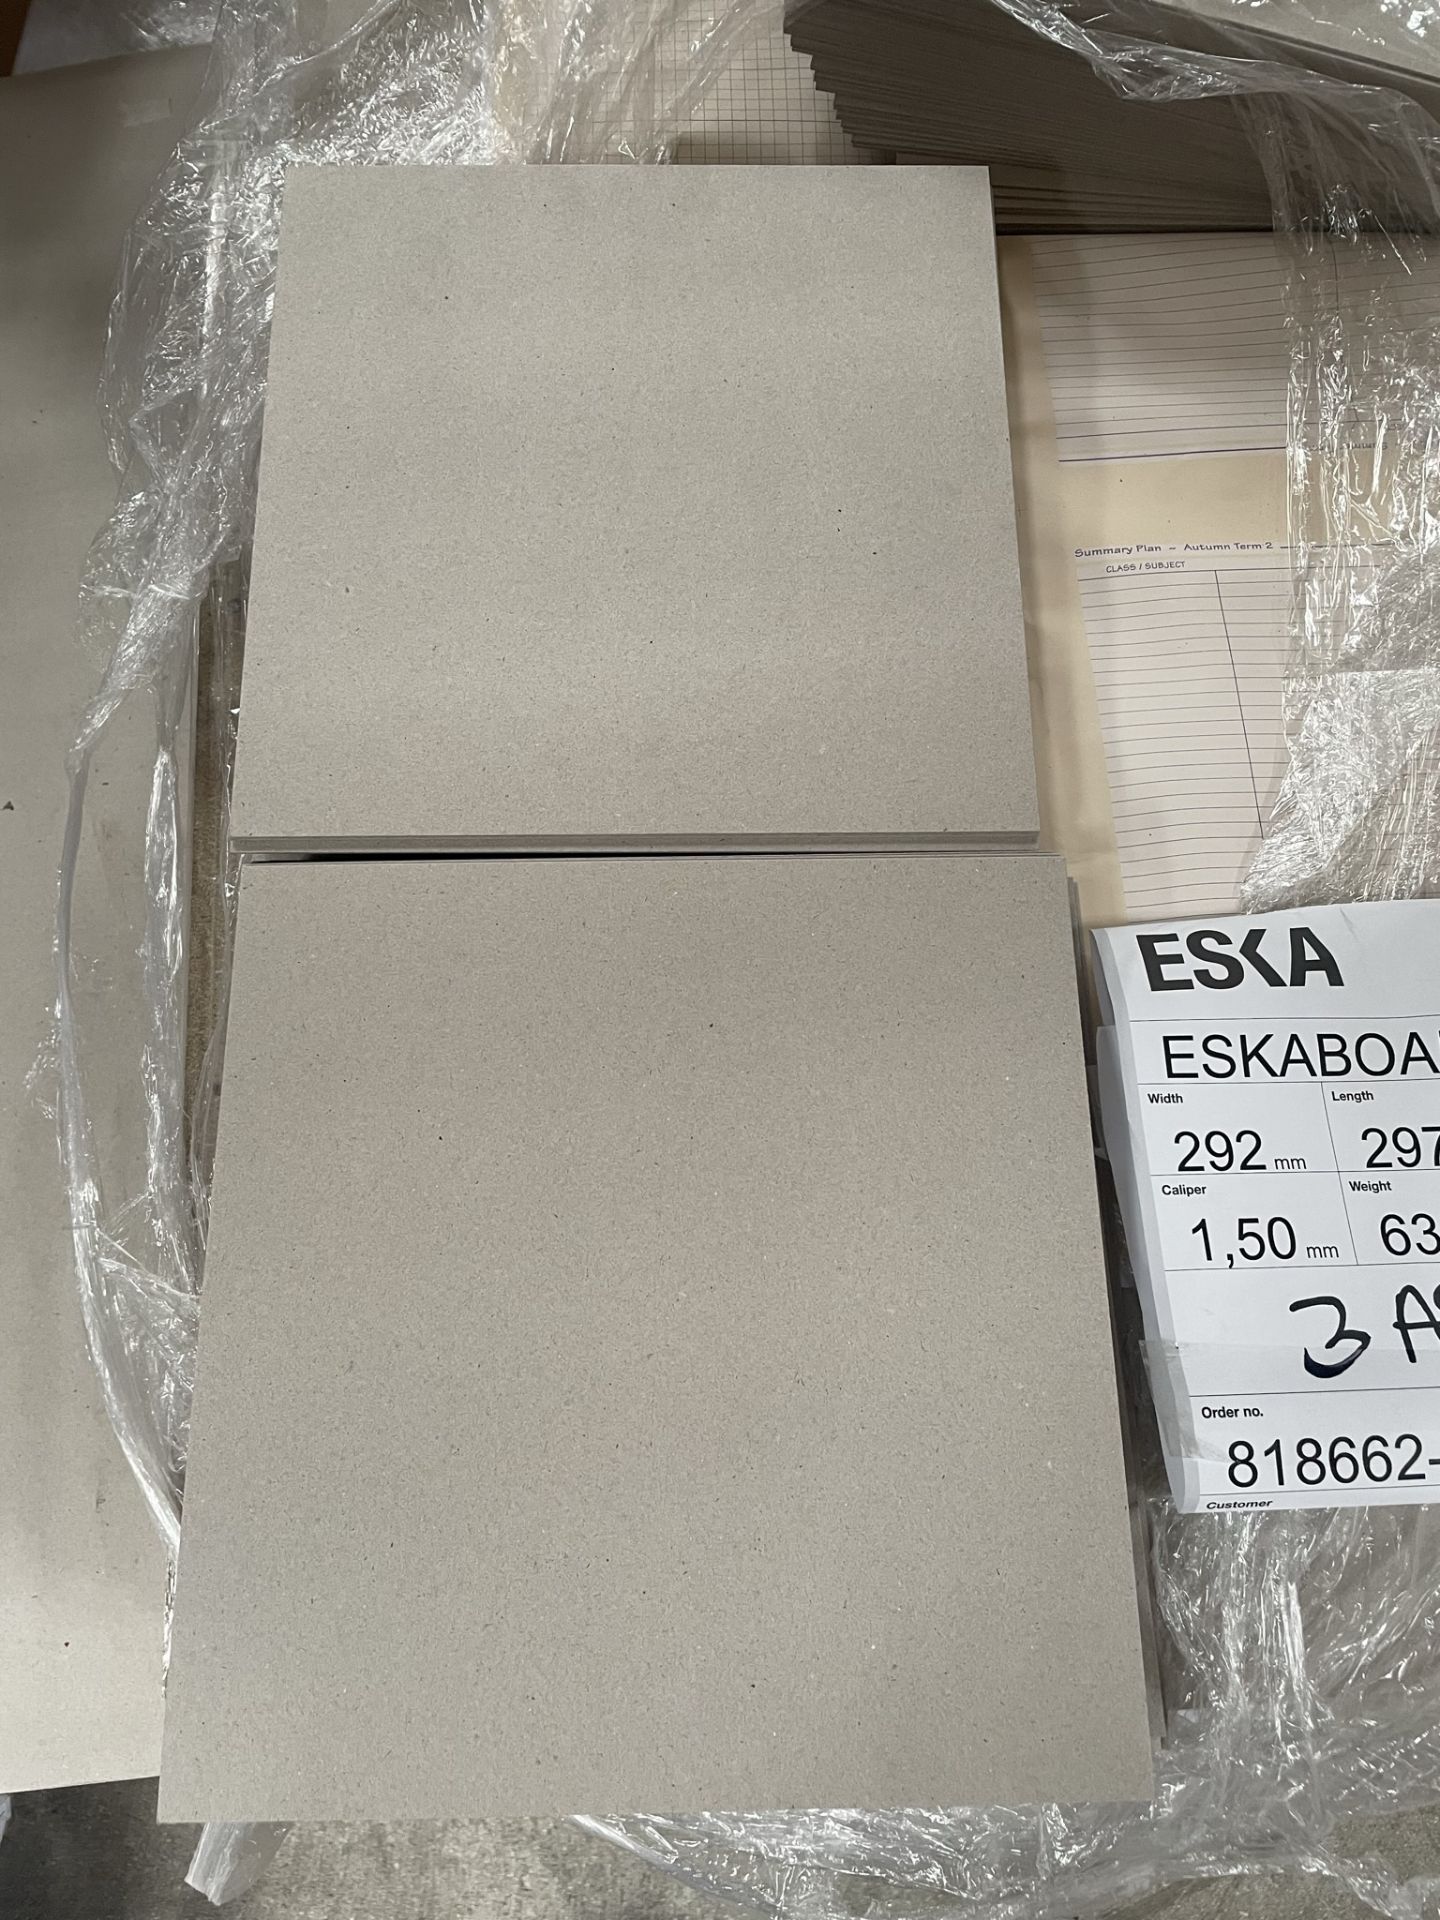 5 x Pallets of 1500 Micron Eskaboard | Approximately 18,600 Sheets | Various Sizes - Image 6 of 7